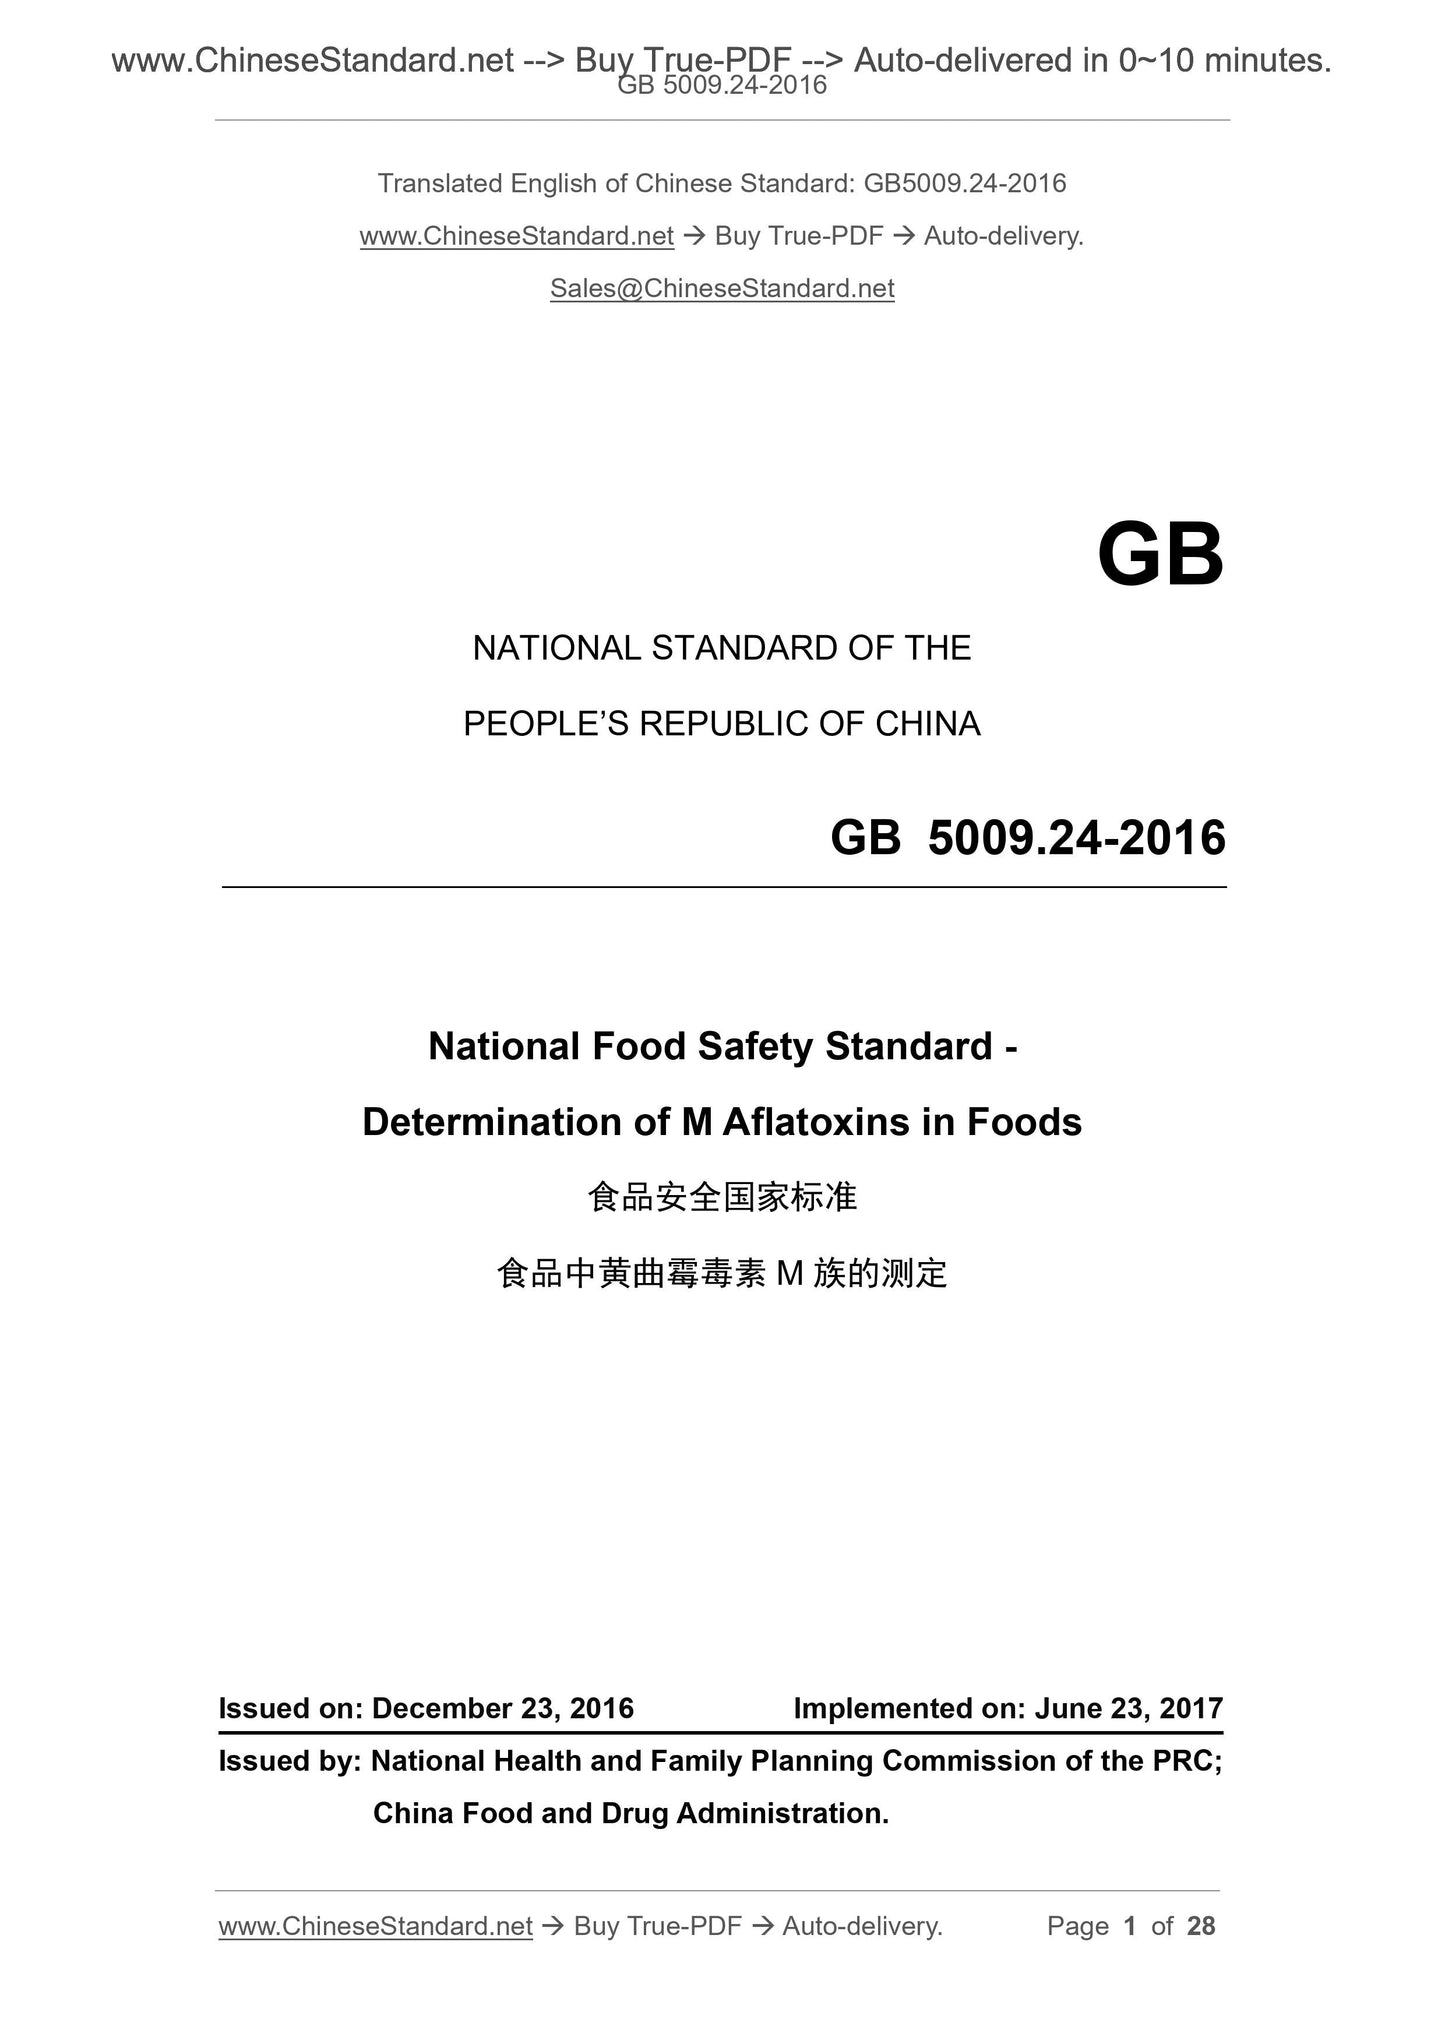 GB 5009.24-2016 Page 1